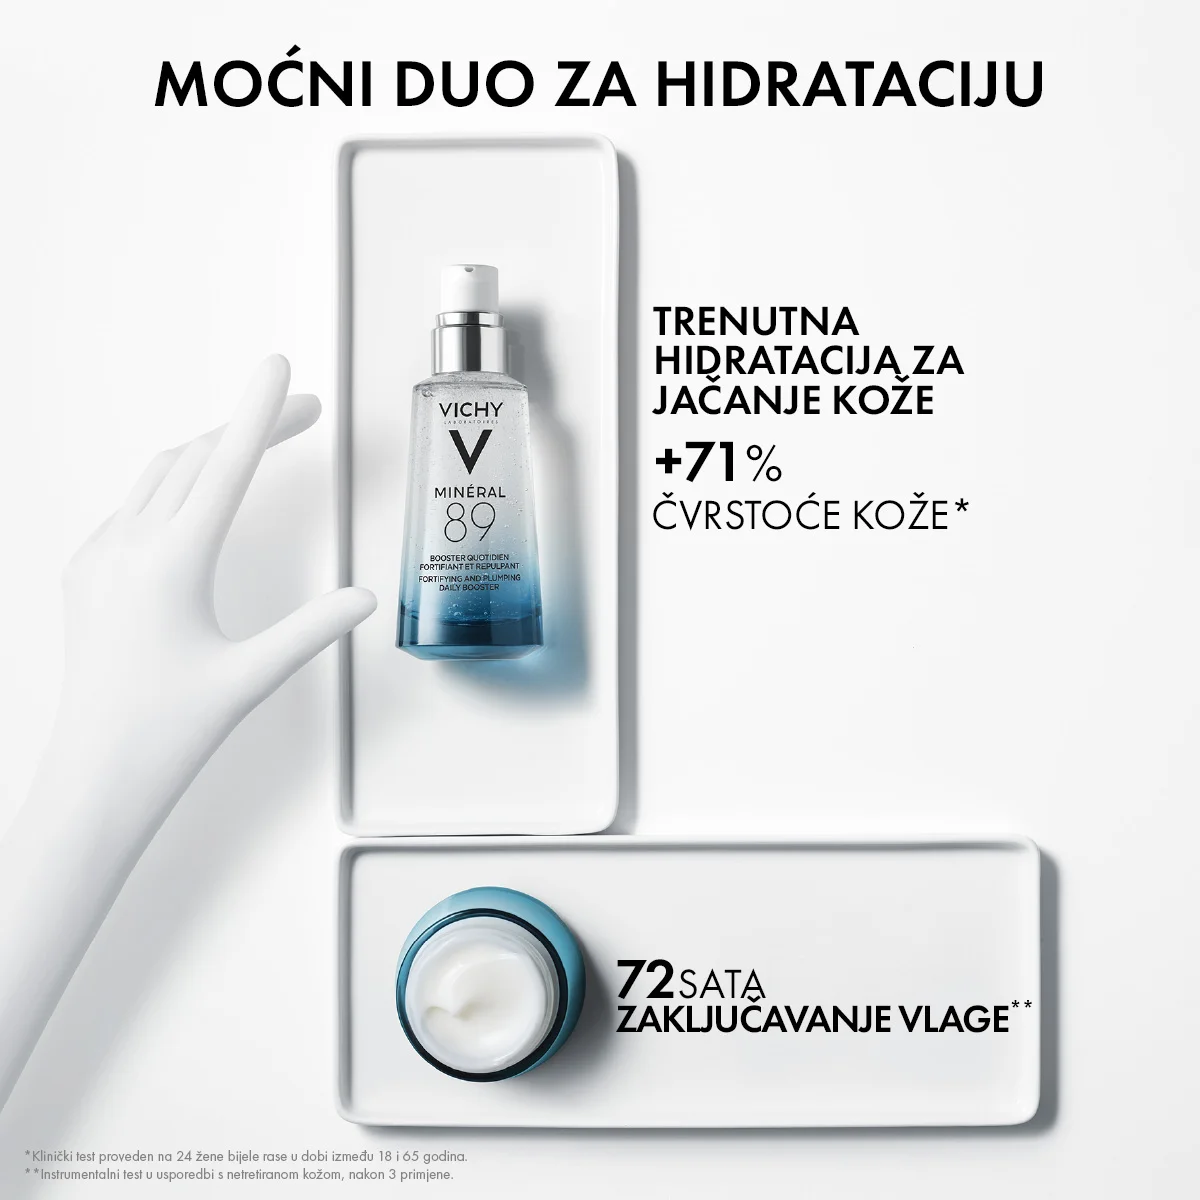 Vichy MINERAL 89 Protocol for intensive hydration and stronger skin for all skin types (3)